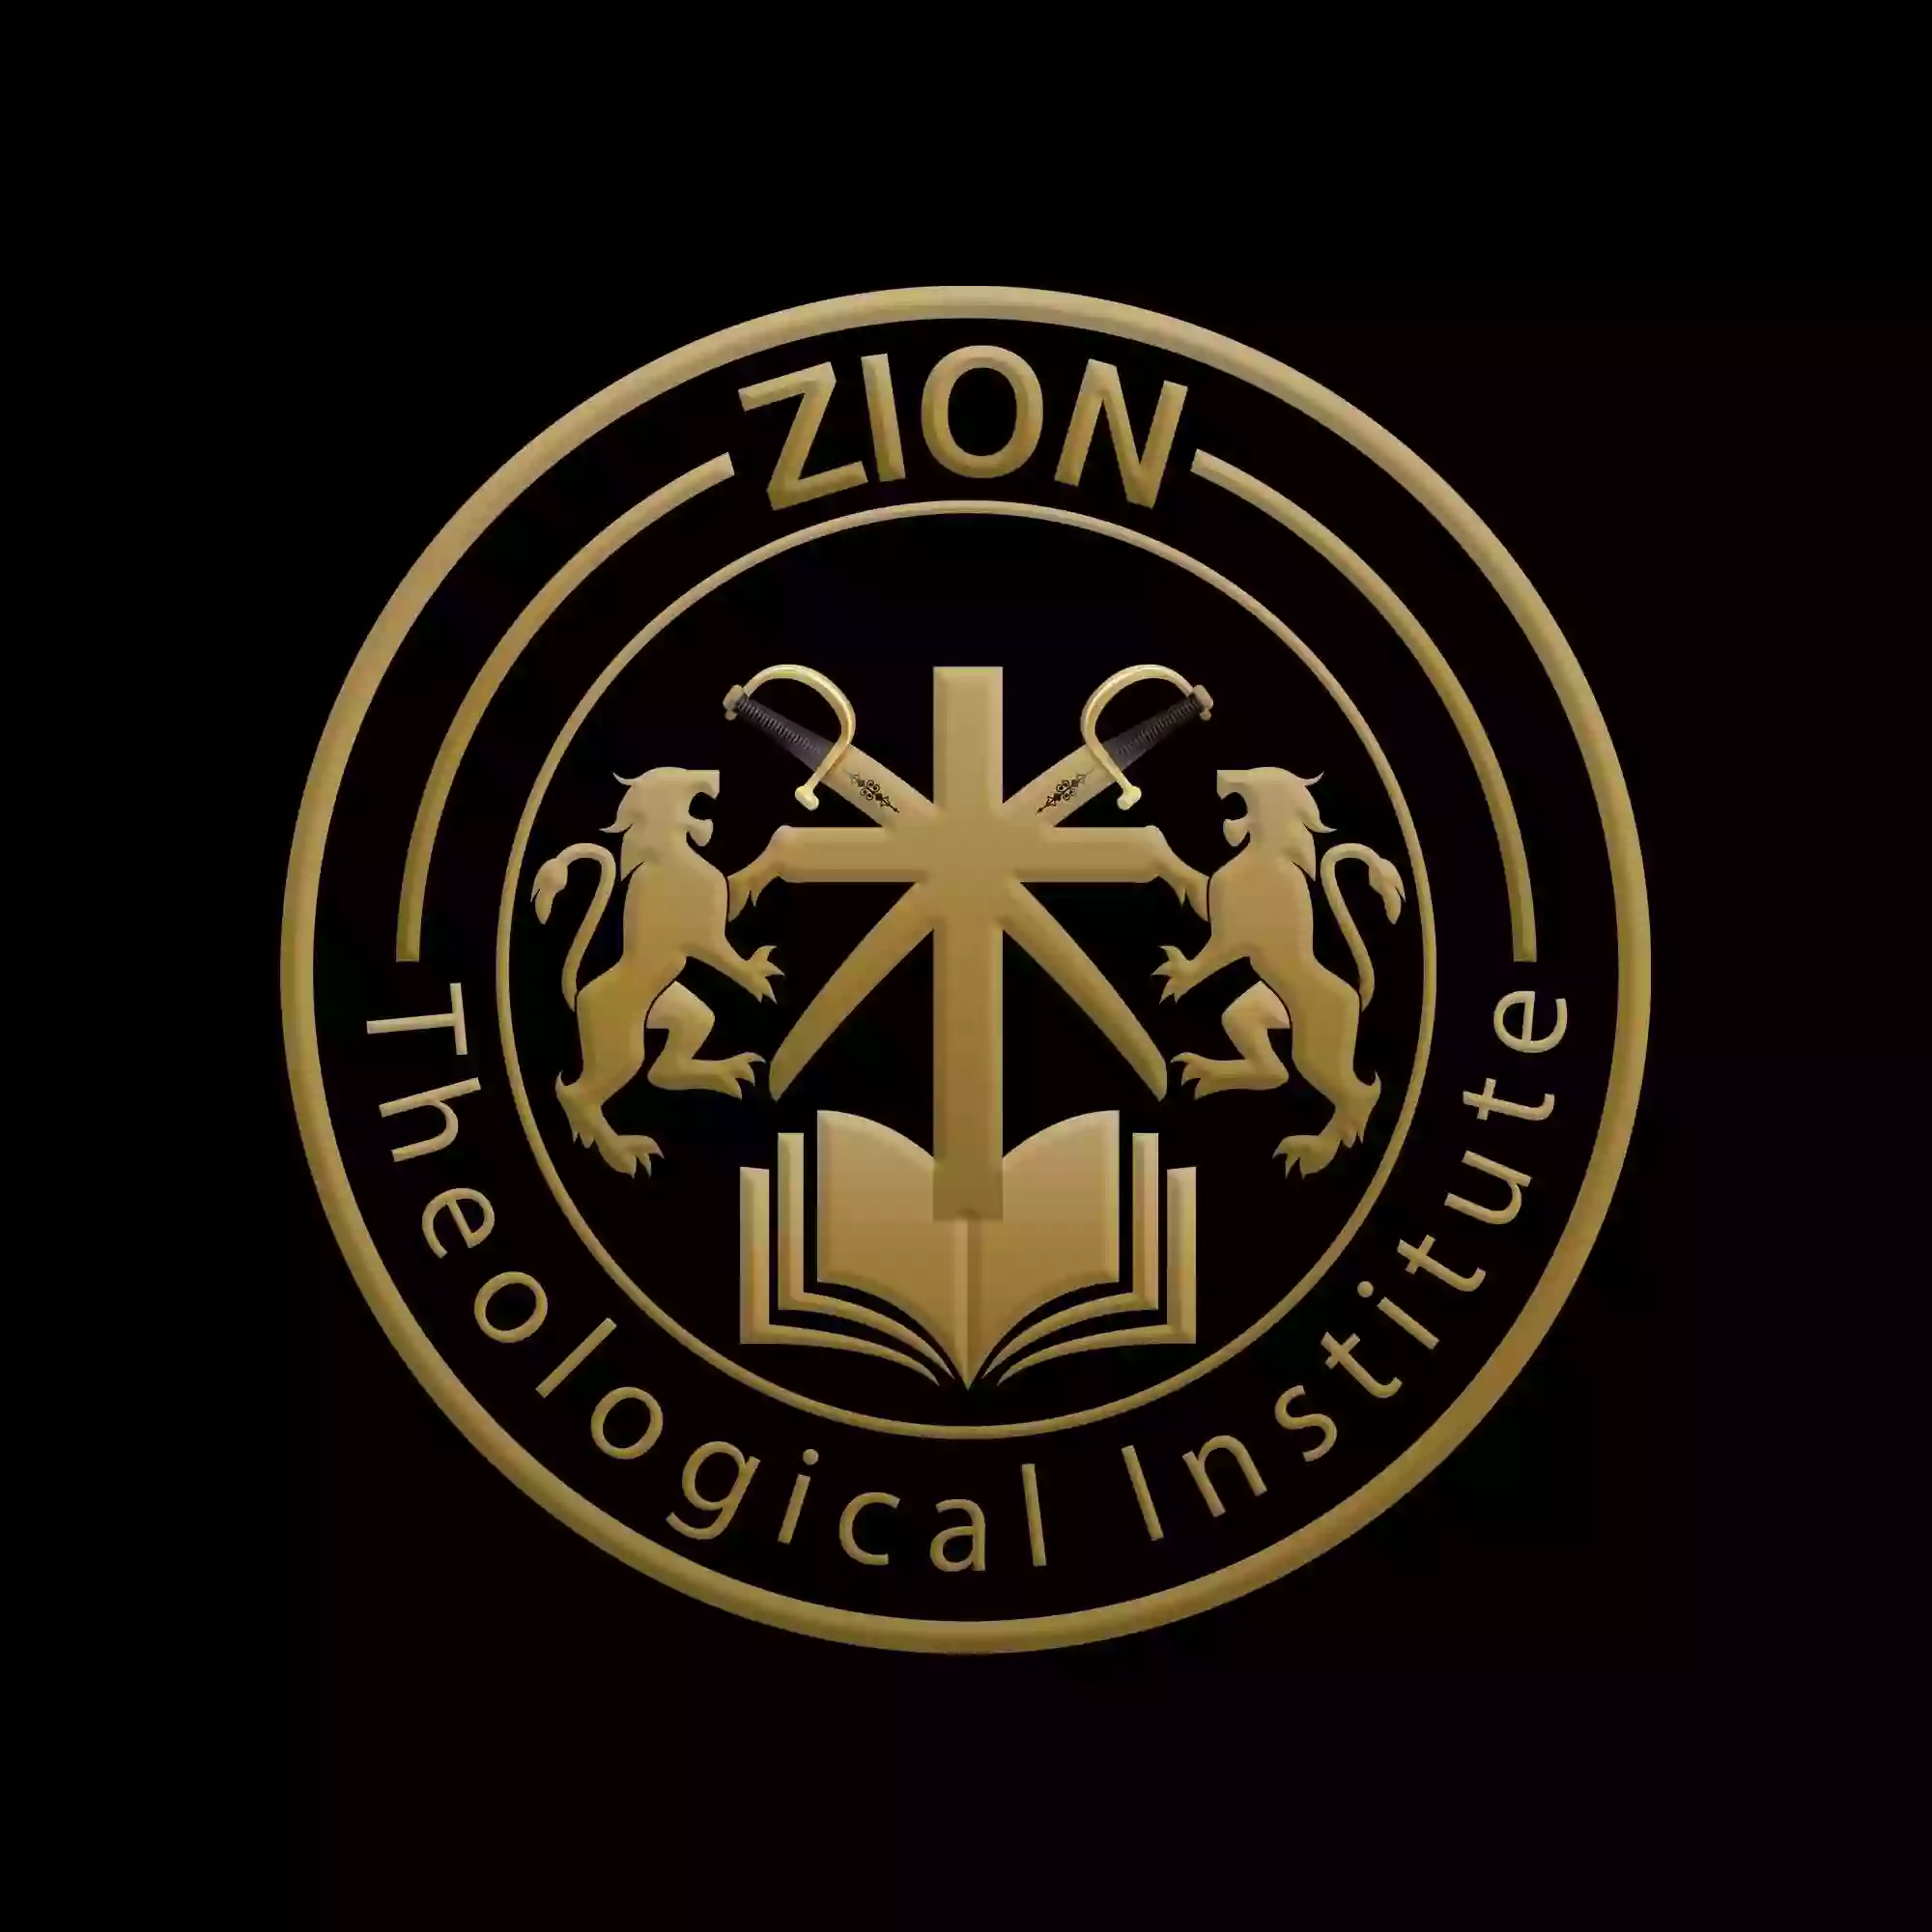 Zion Theological Institute